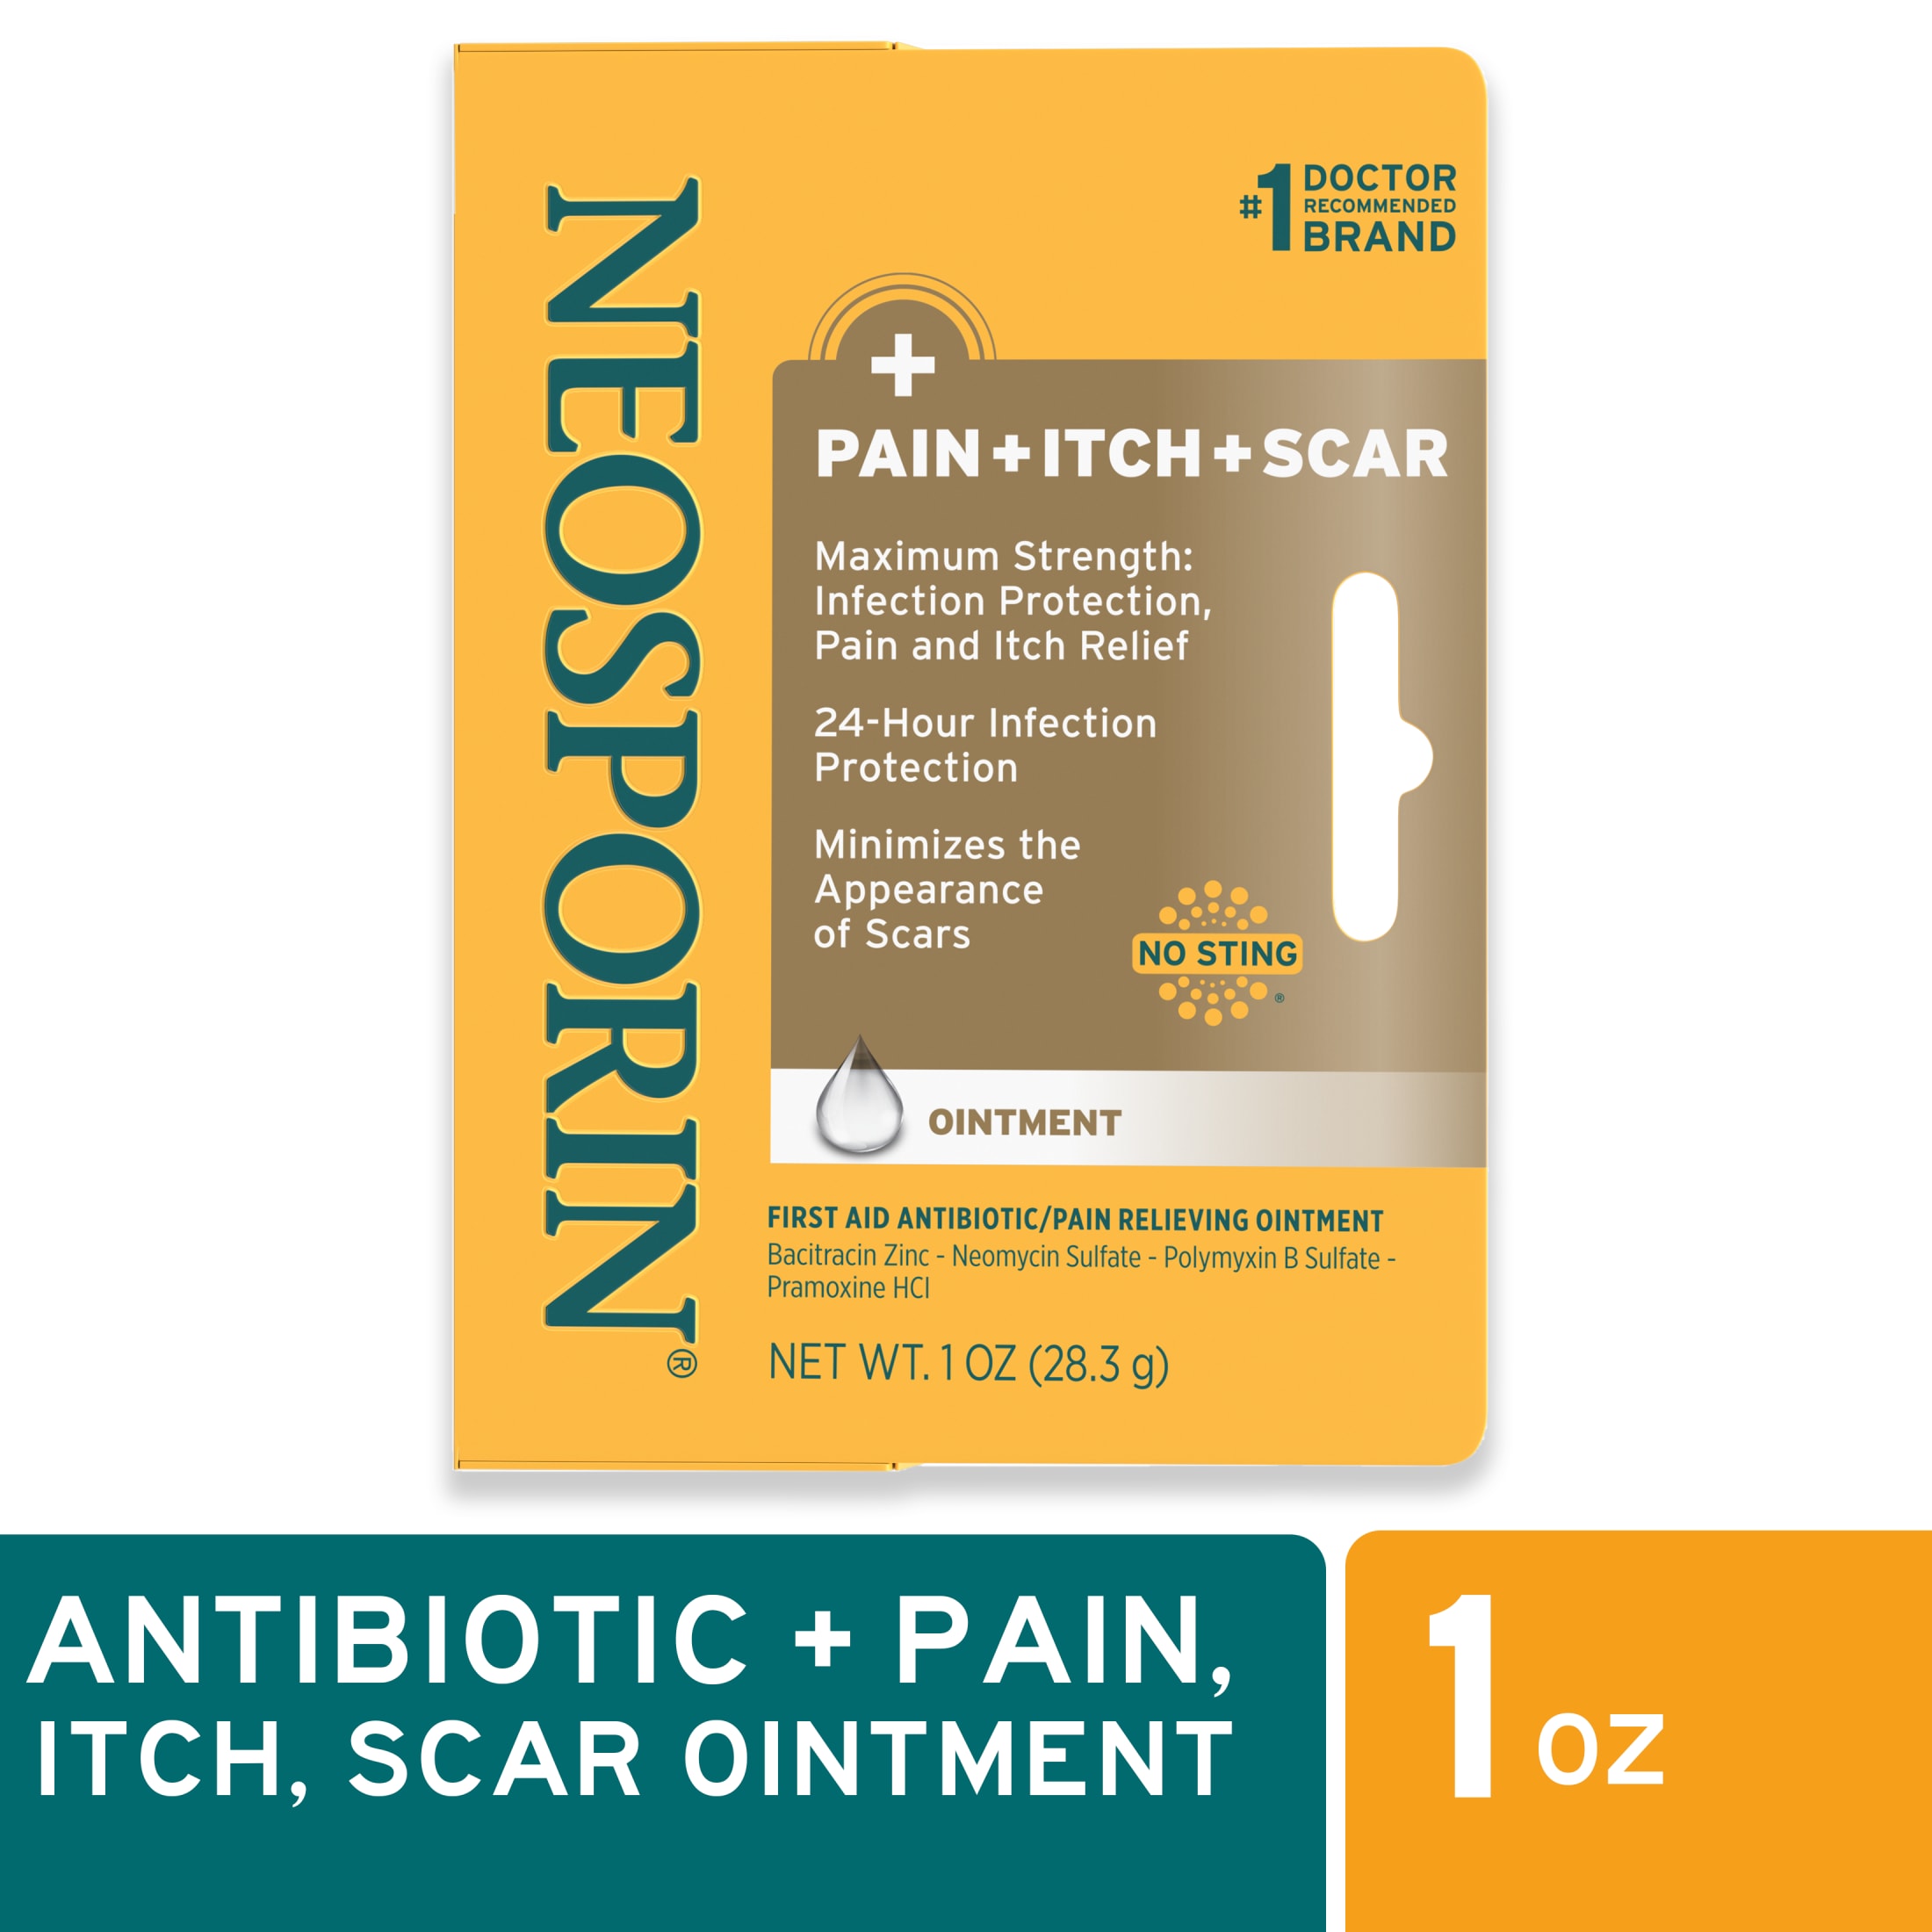 Neosporin Pain, Itch & Scar First Aid Antibiotic Ointment, 1 oz - image 1 of 16